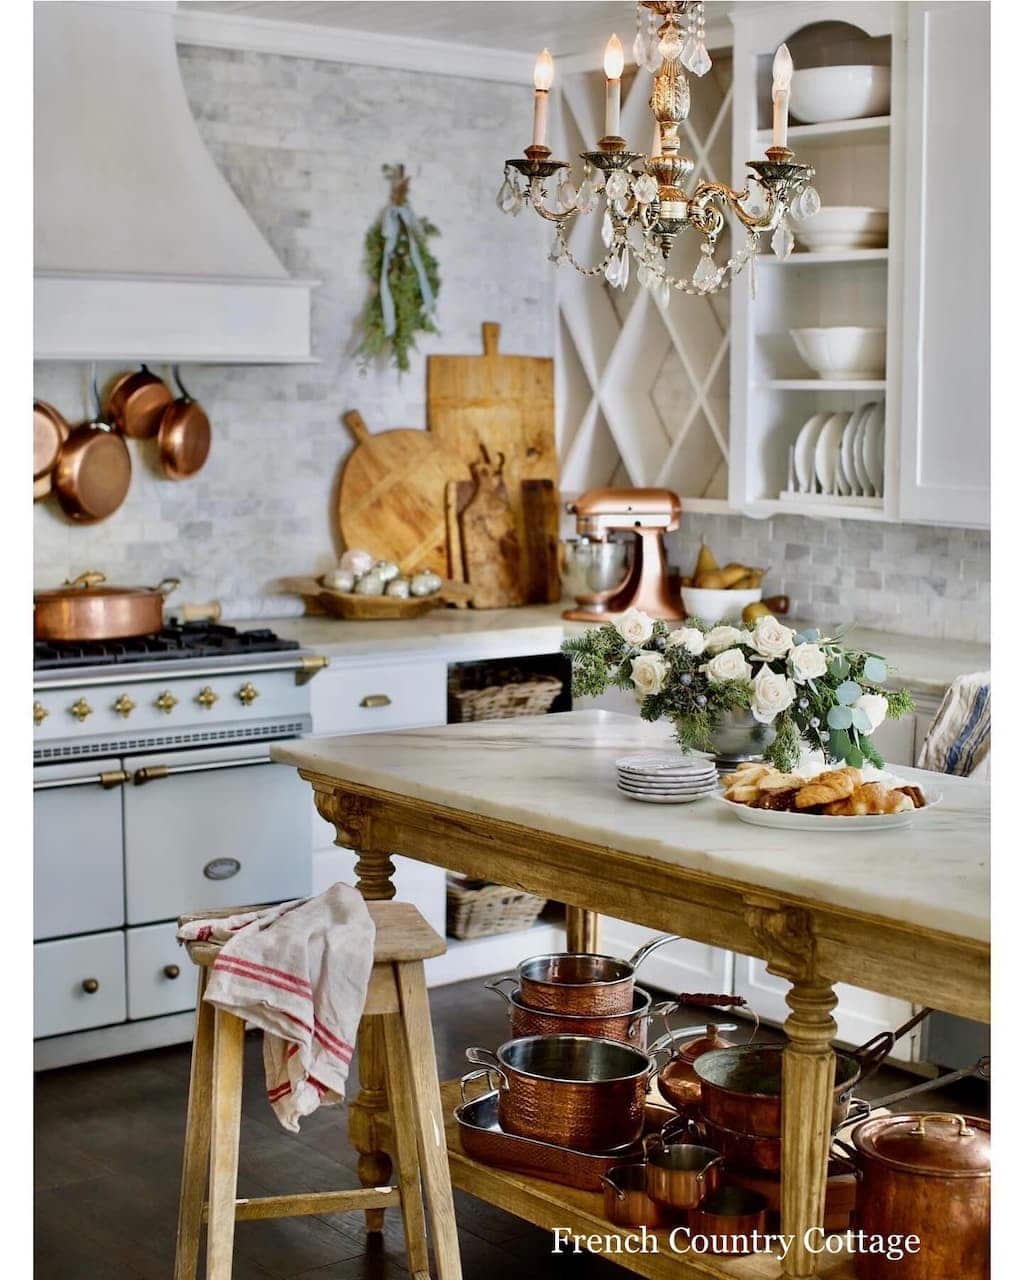 Antique table used as the kitchen island, collection of copper pots and wood cutting boards.